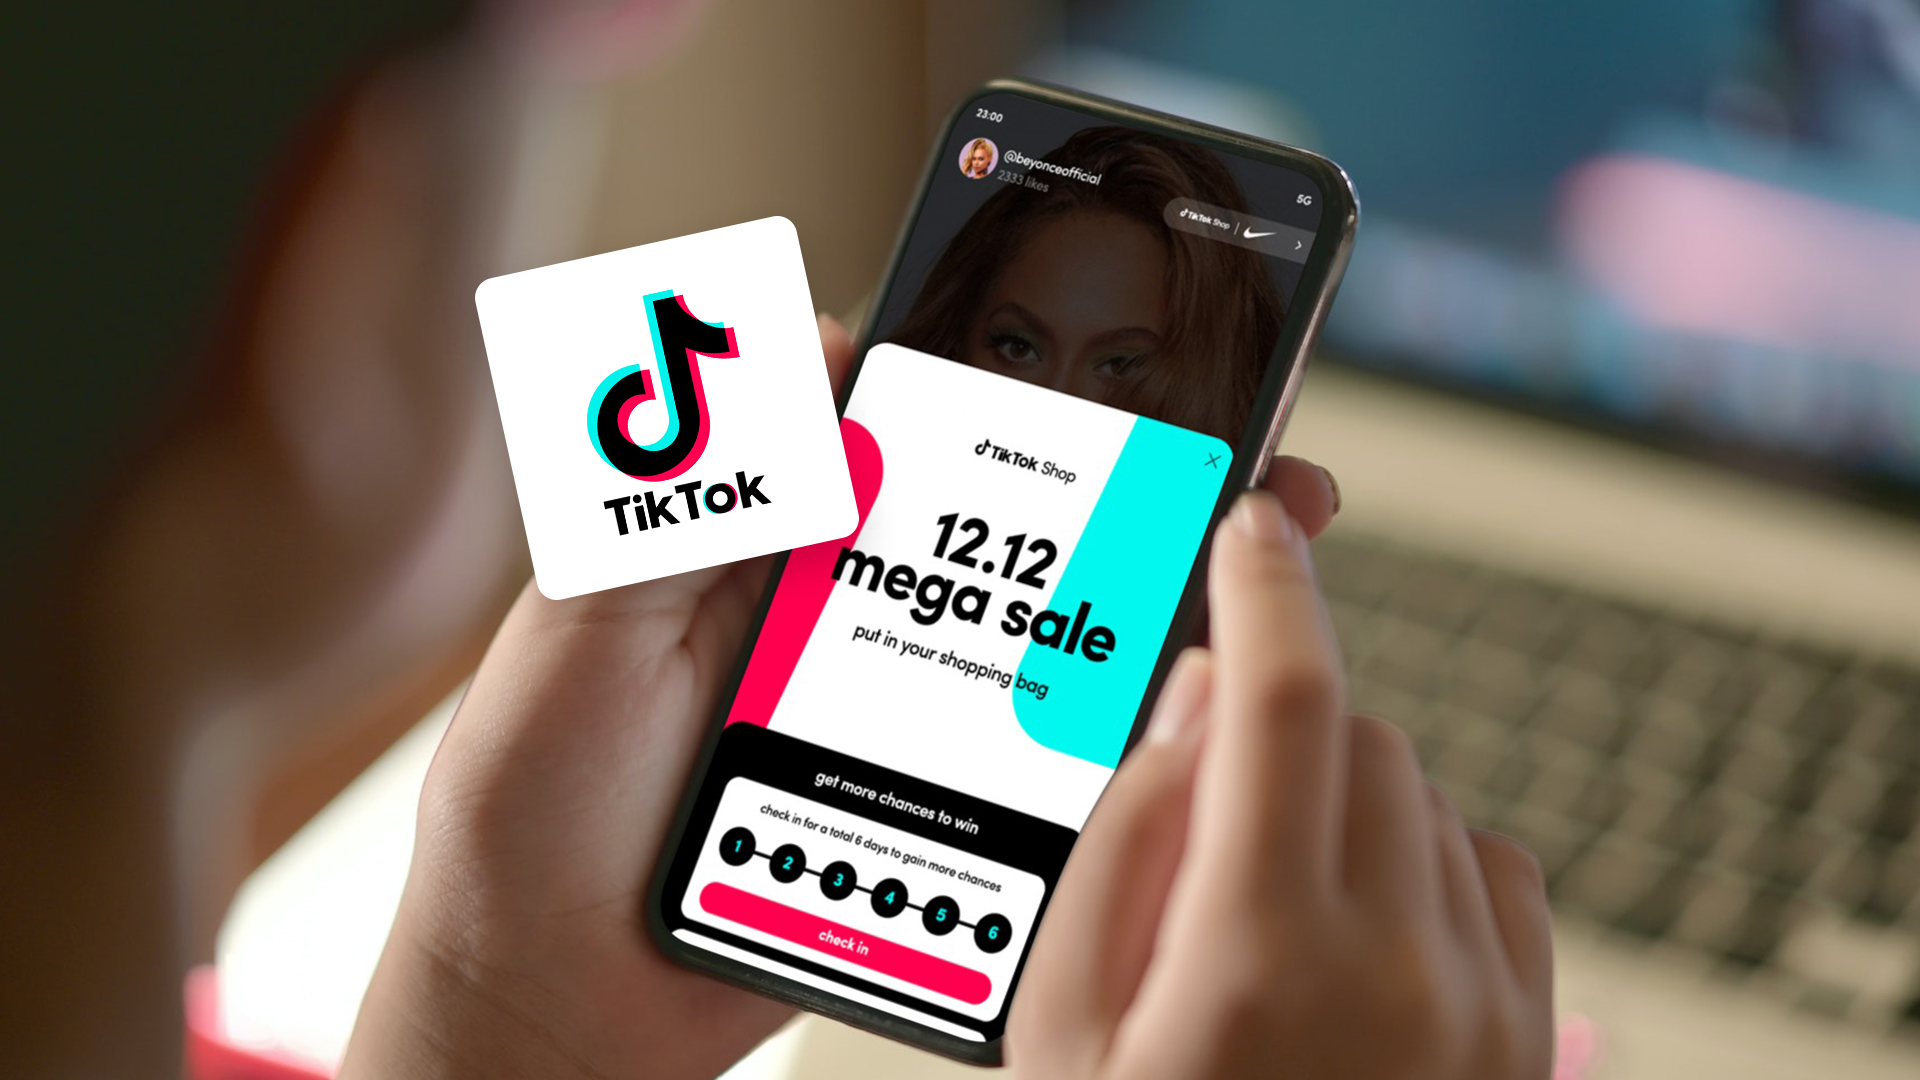 TikTok Storefront shutdown: What does this mean for brands?